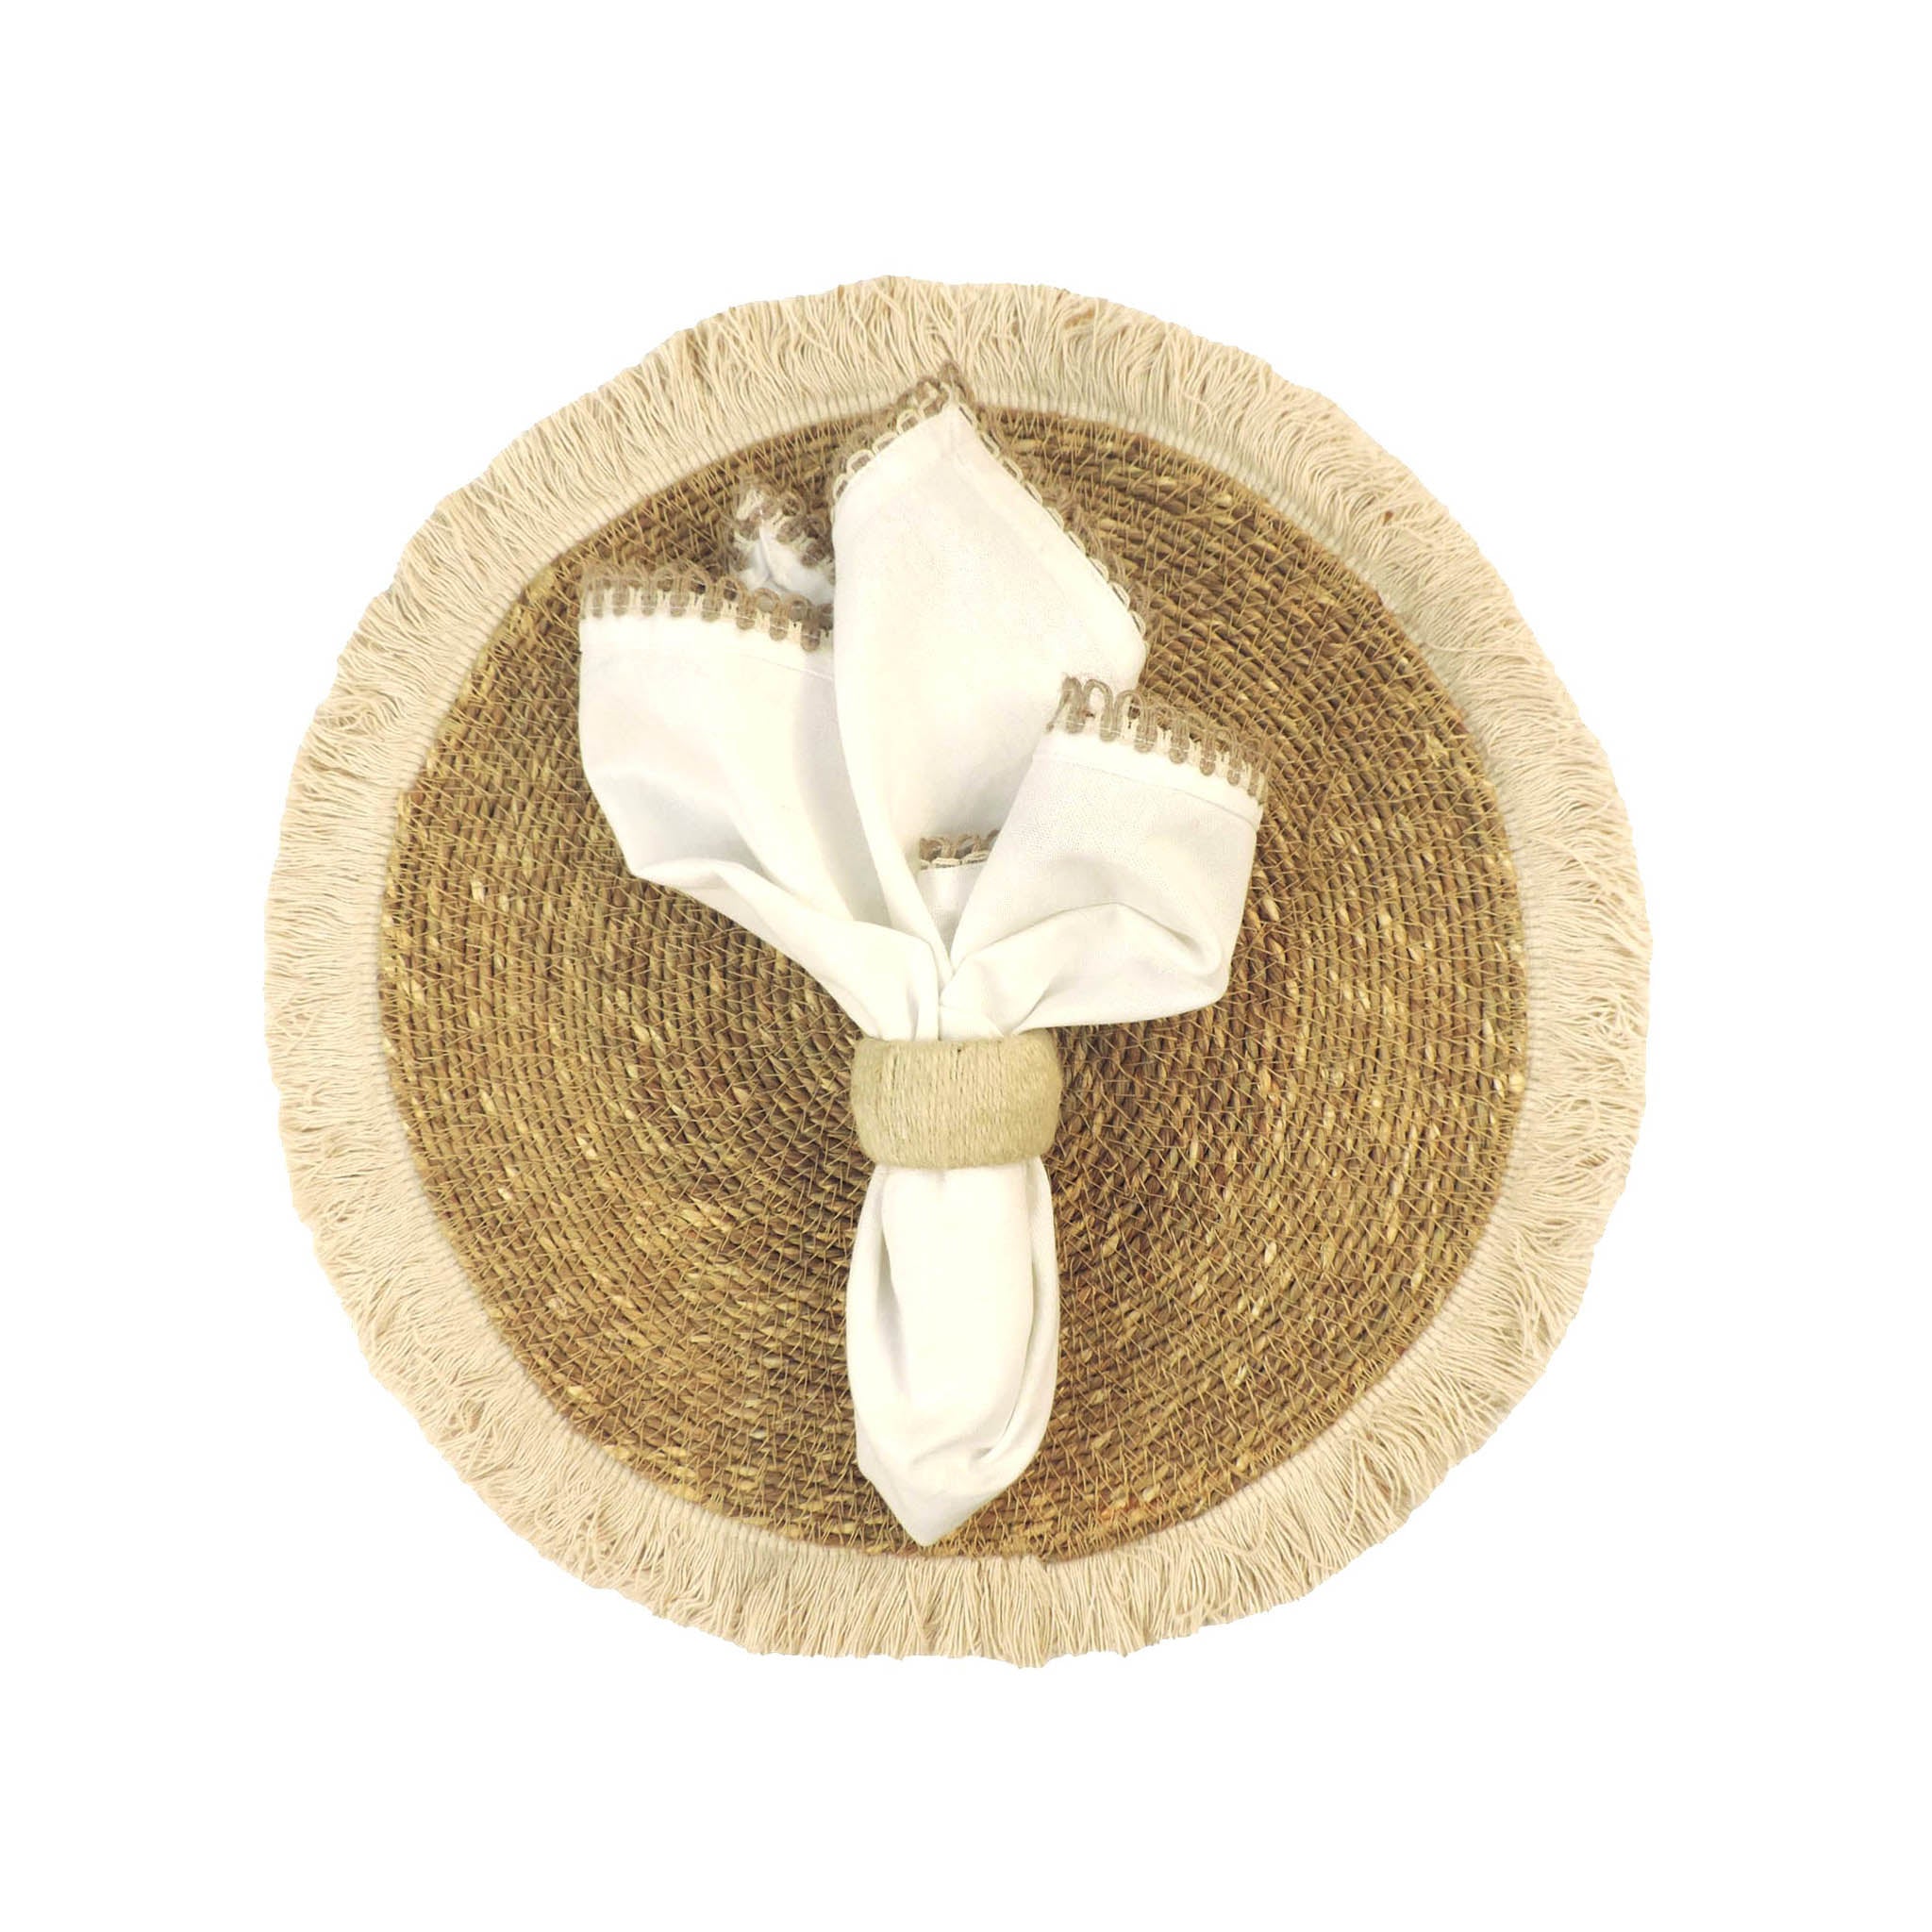 Jute Fringed Edge Placemat in Natural White, Set of 2/4